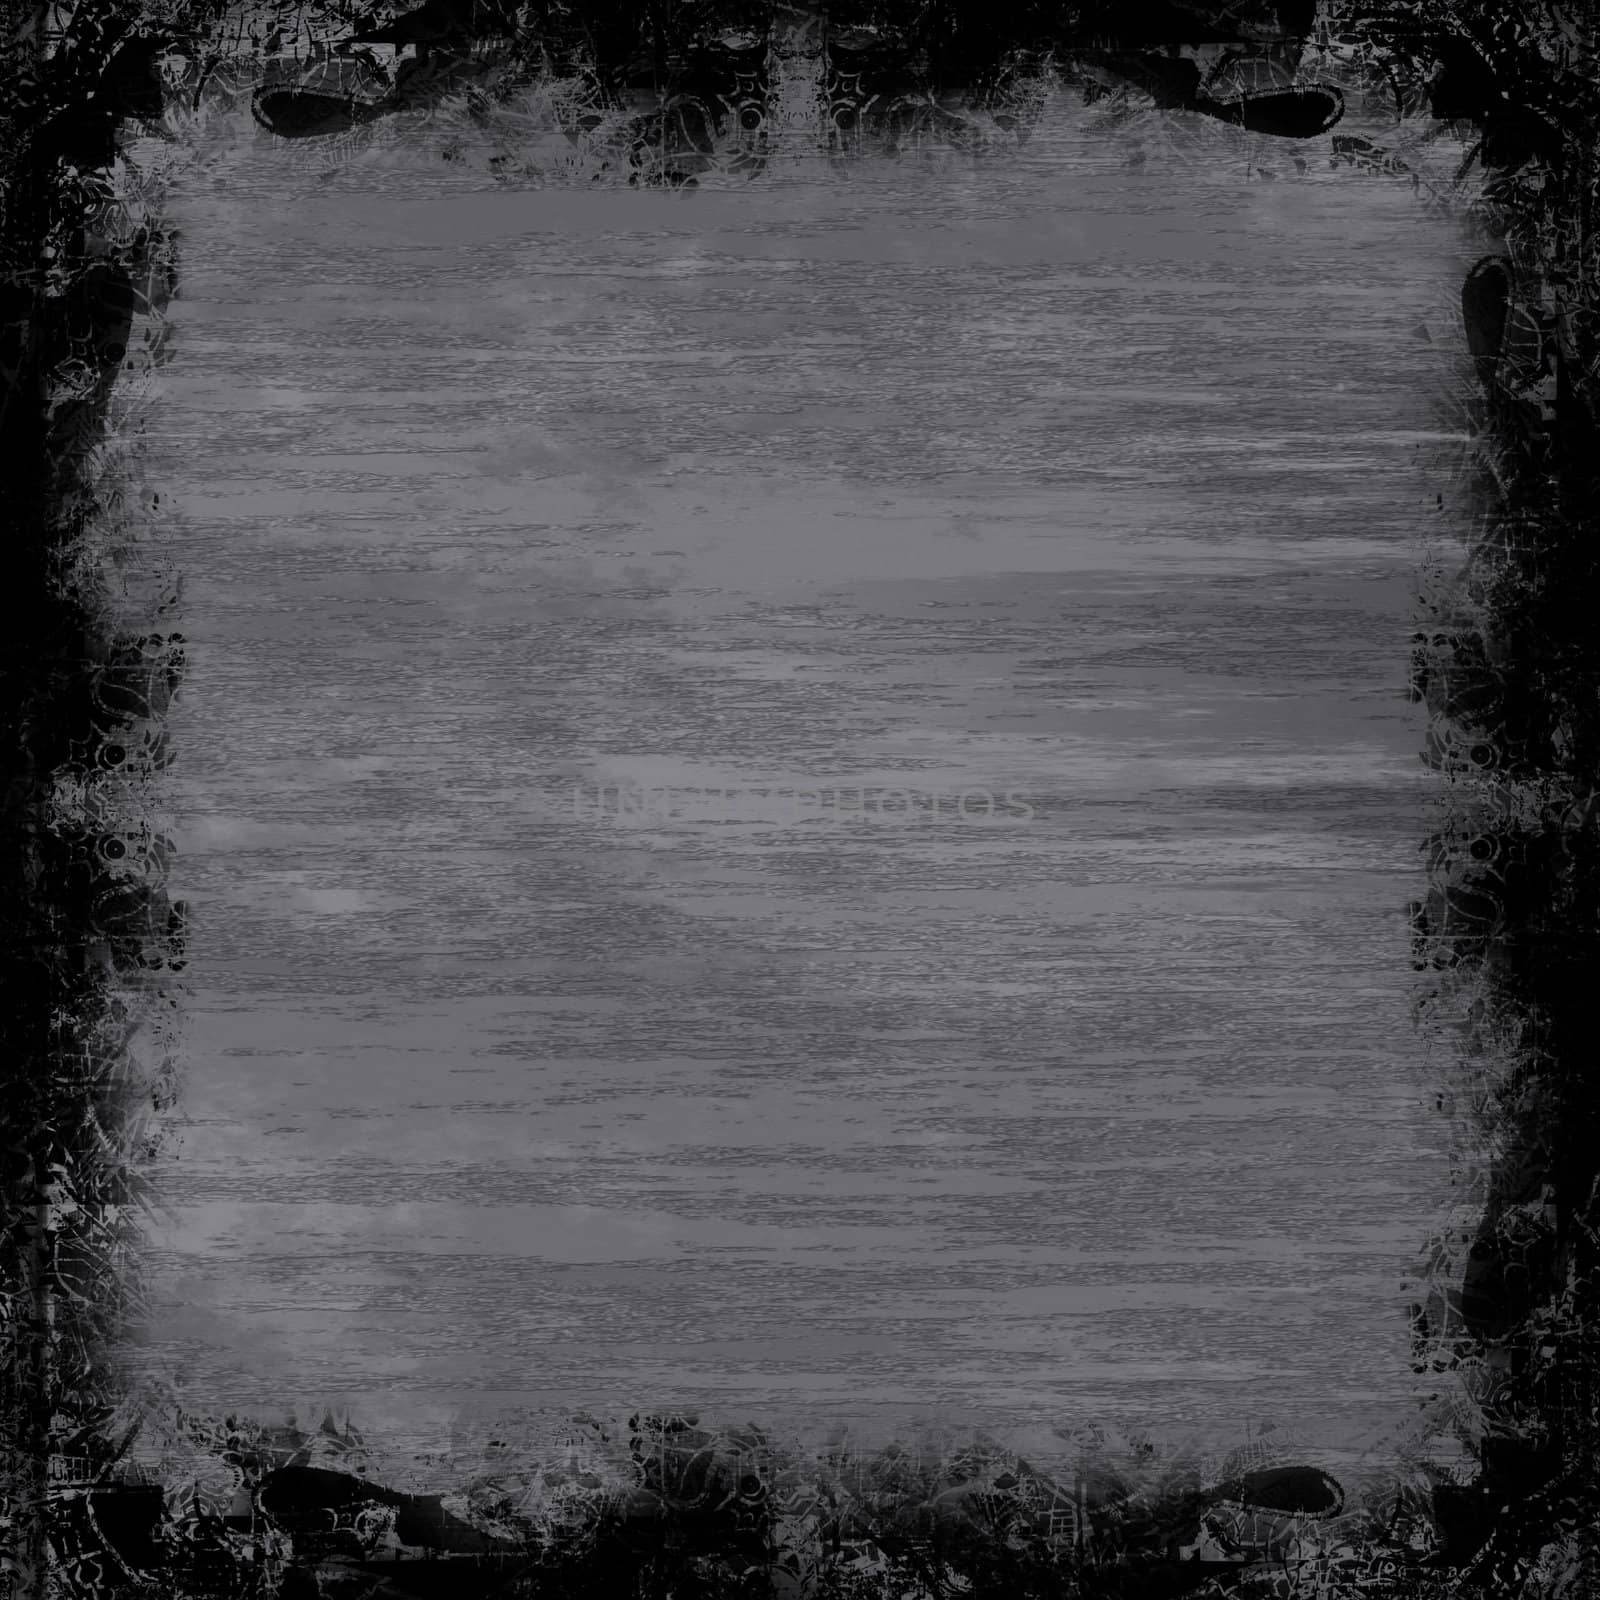 A metallic grunge border.  Works great as a background.